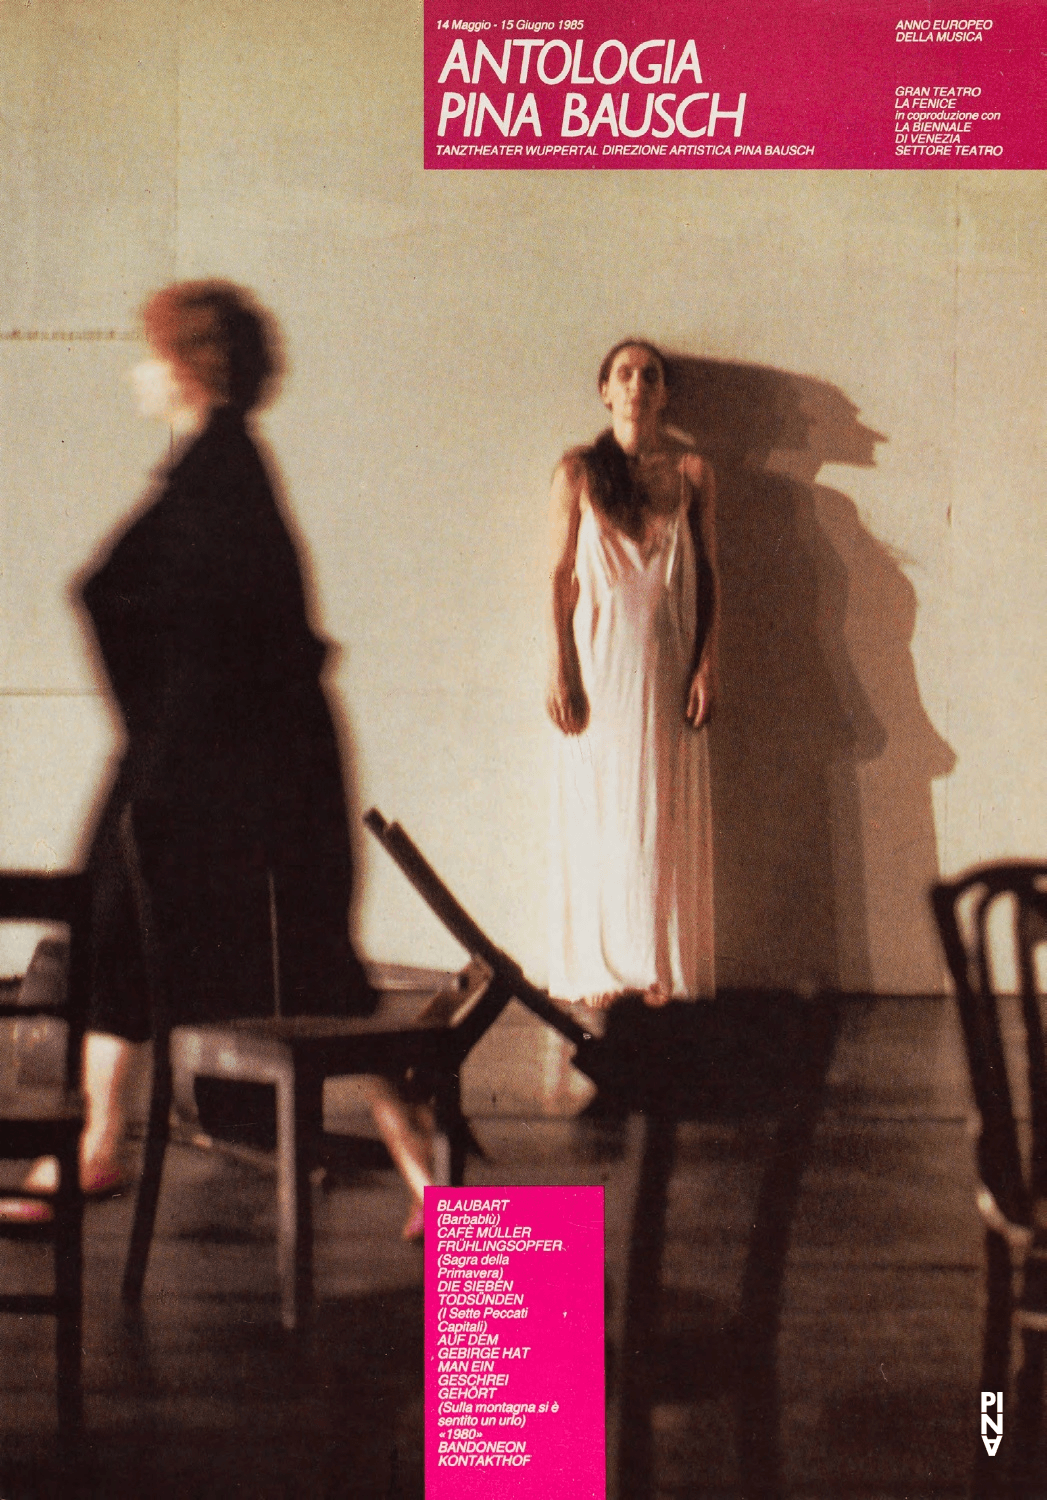 Booklet for “Bluebeard. While Listening to a Tape Recording of Béla Bartók's Opera "Duke Bluebeard's Castle"”, “The Rite of Spring”, “Café Müller” and more by Pina Bausch with Tanztheater Wuppertal in in Rome and Venice, 05/14/1985 – 06/15/1985